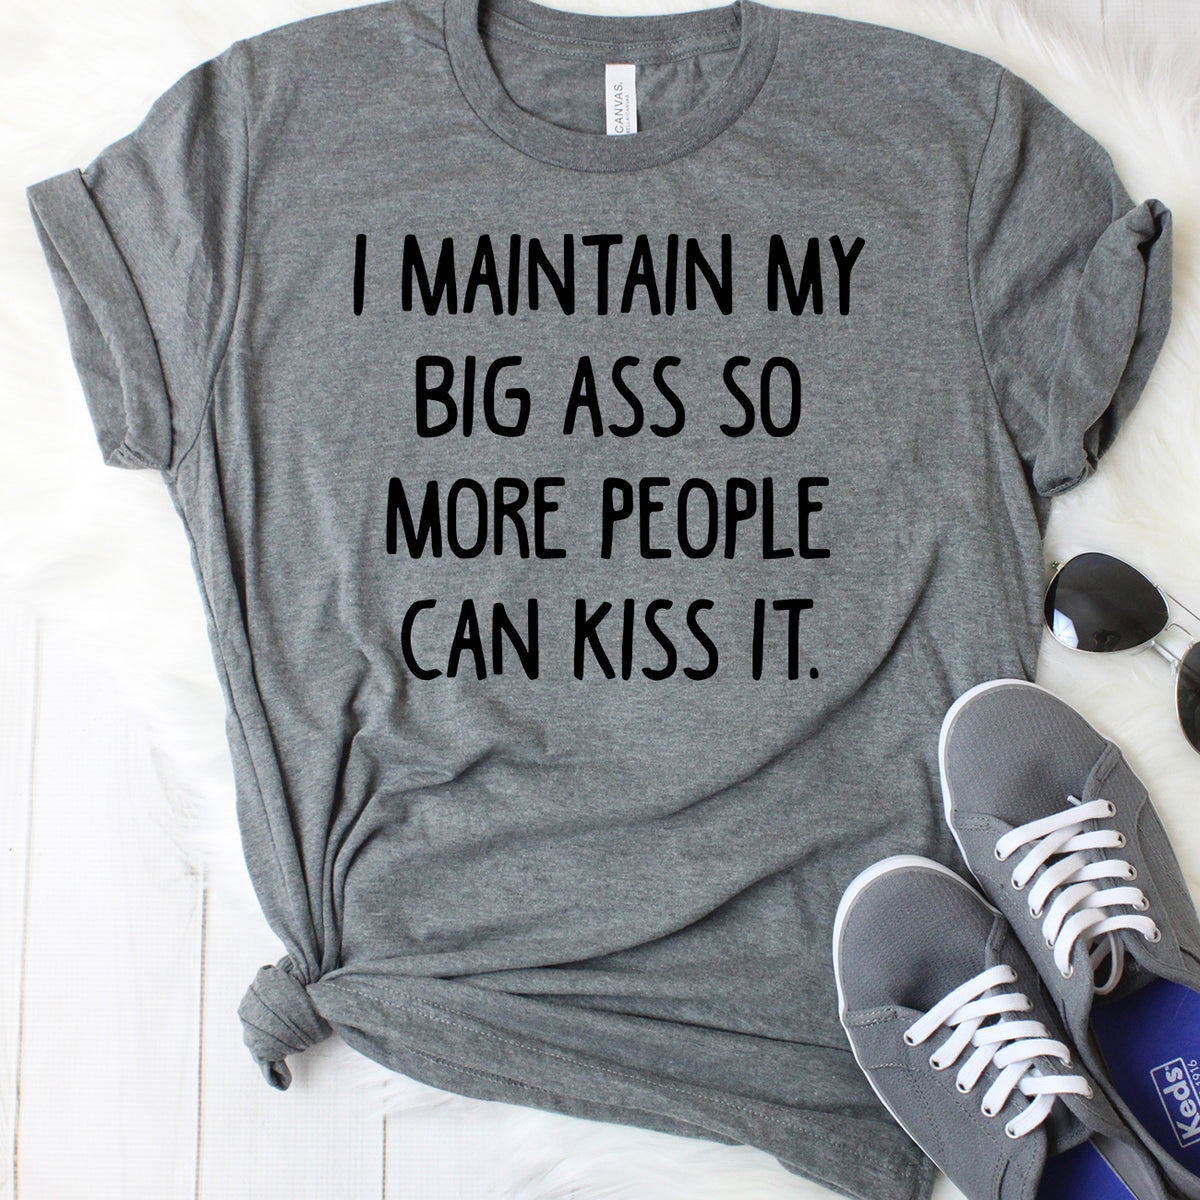 I Maintain My Big Ass So More People Can Kiss It Dark Grey T-Shirt